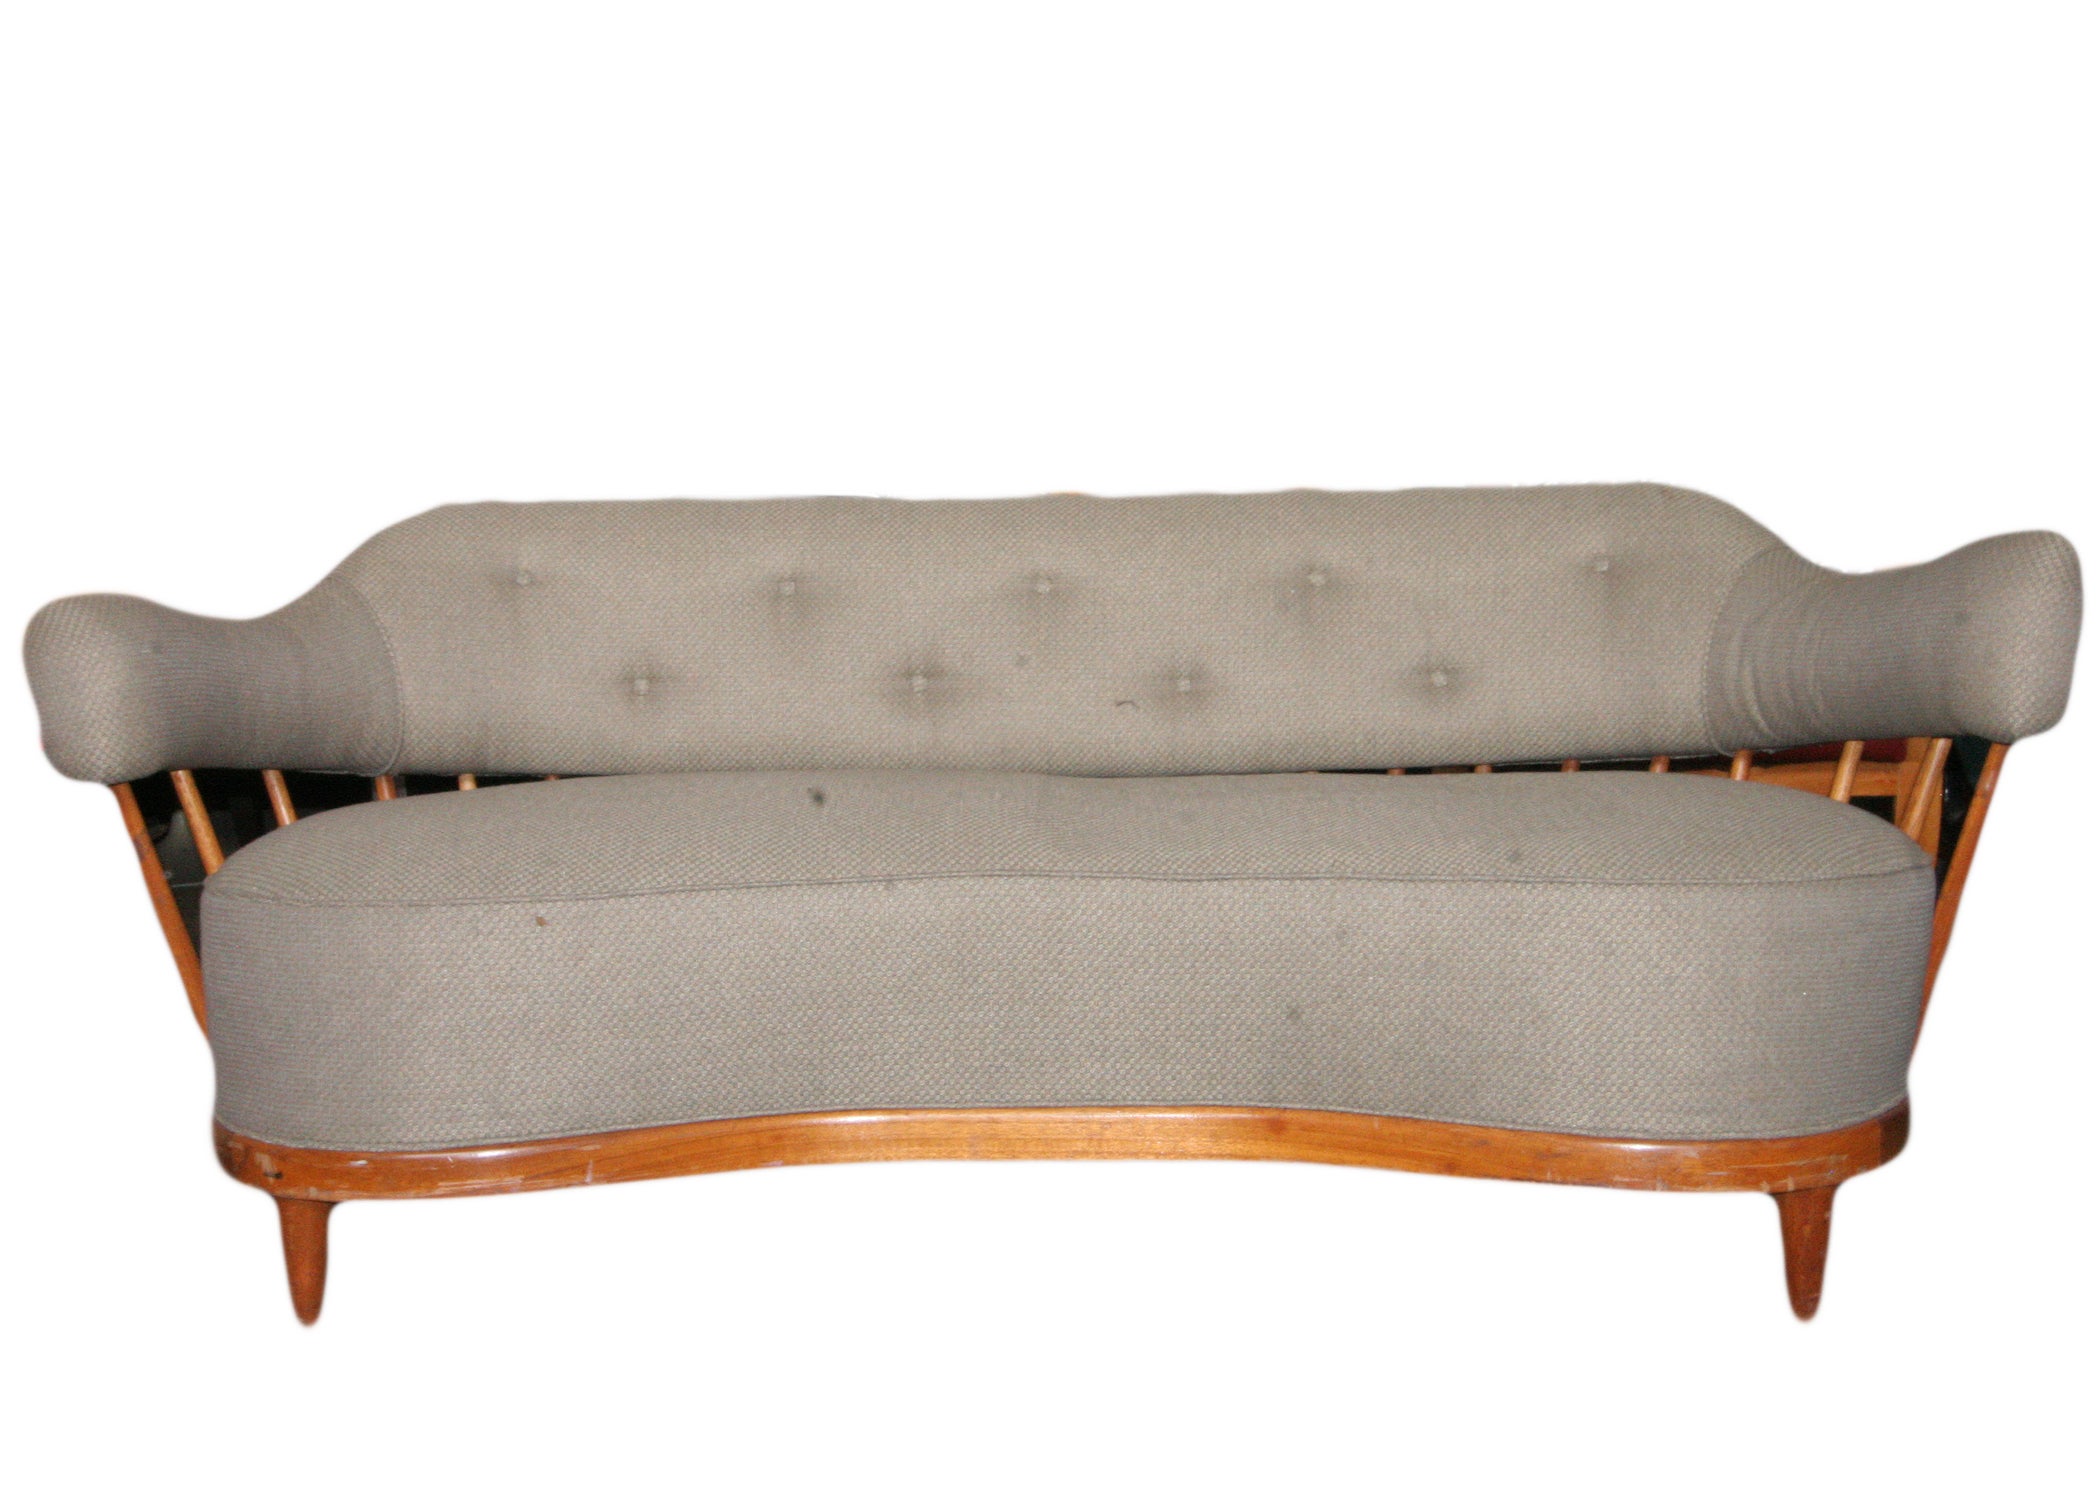 Mid-Century Modern Tufted Spindle Back Sofa